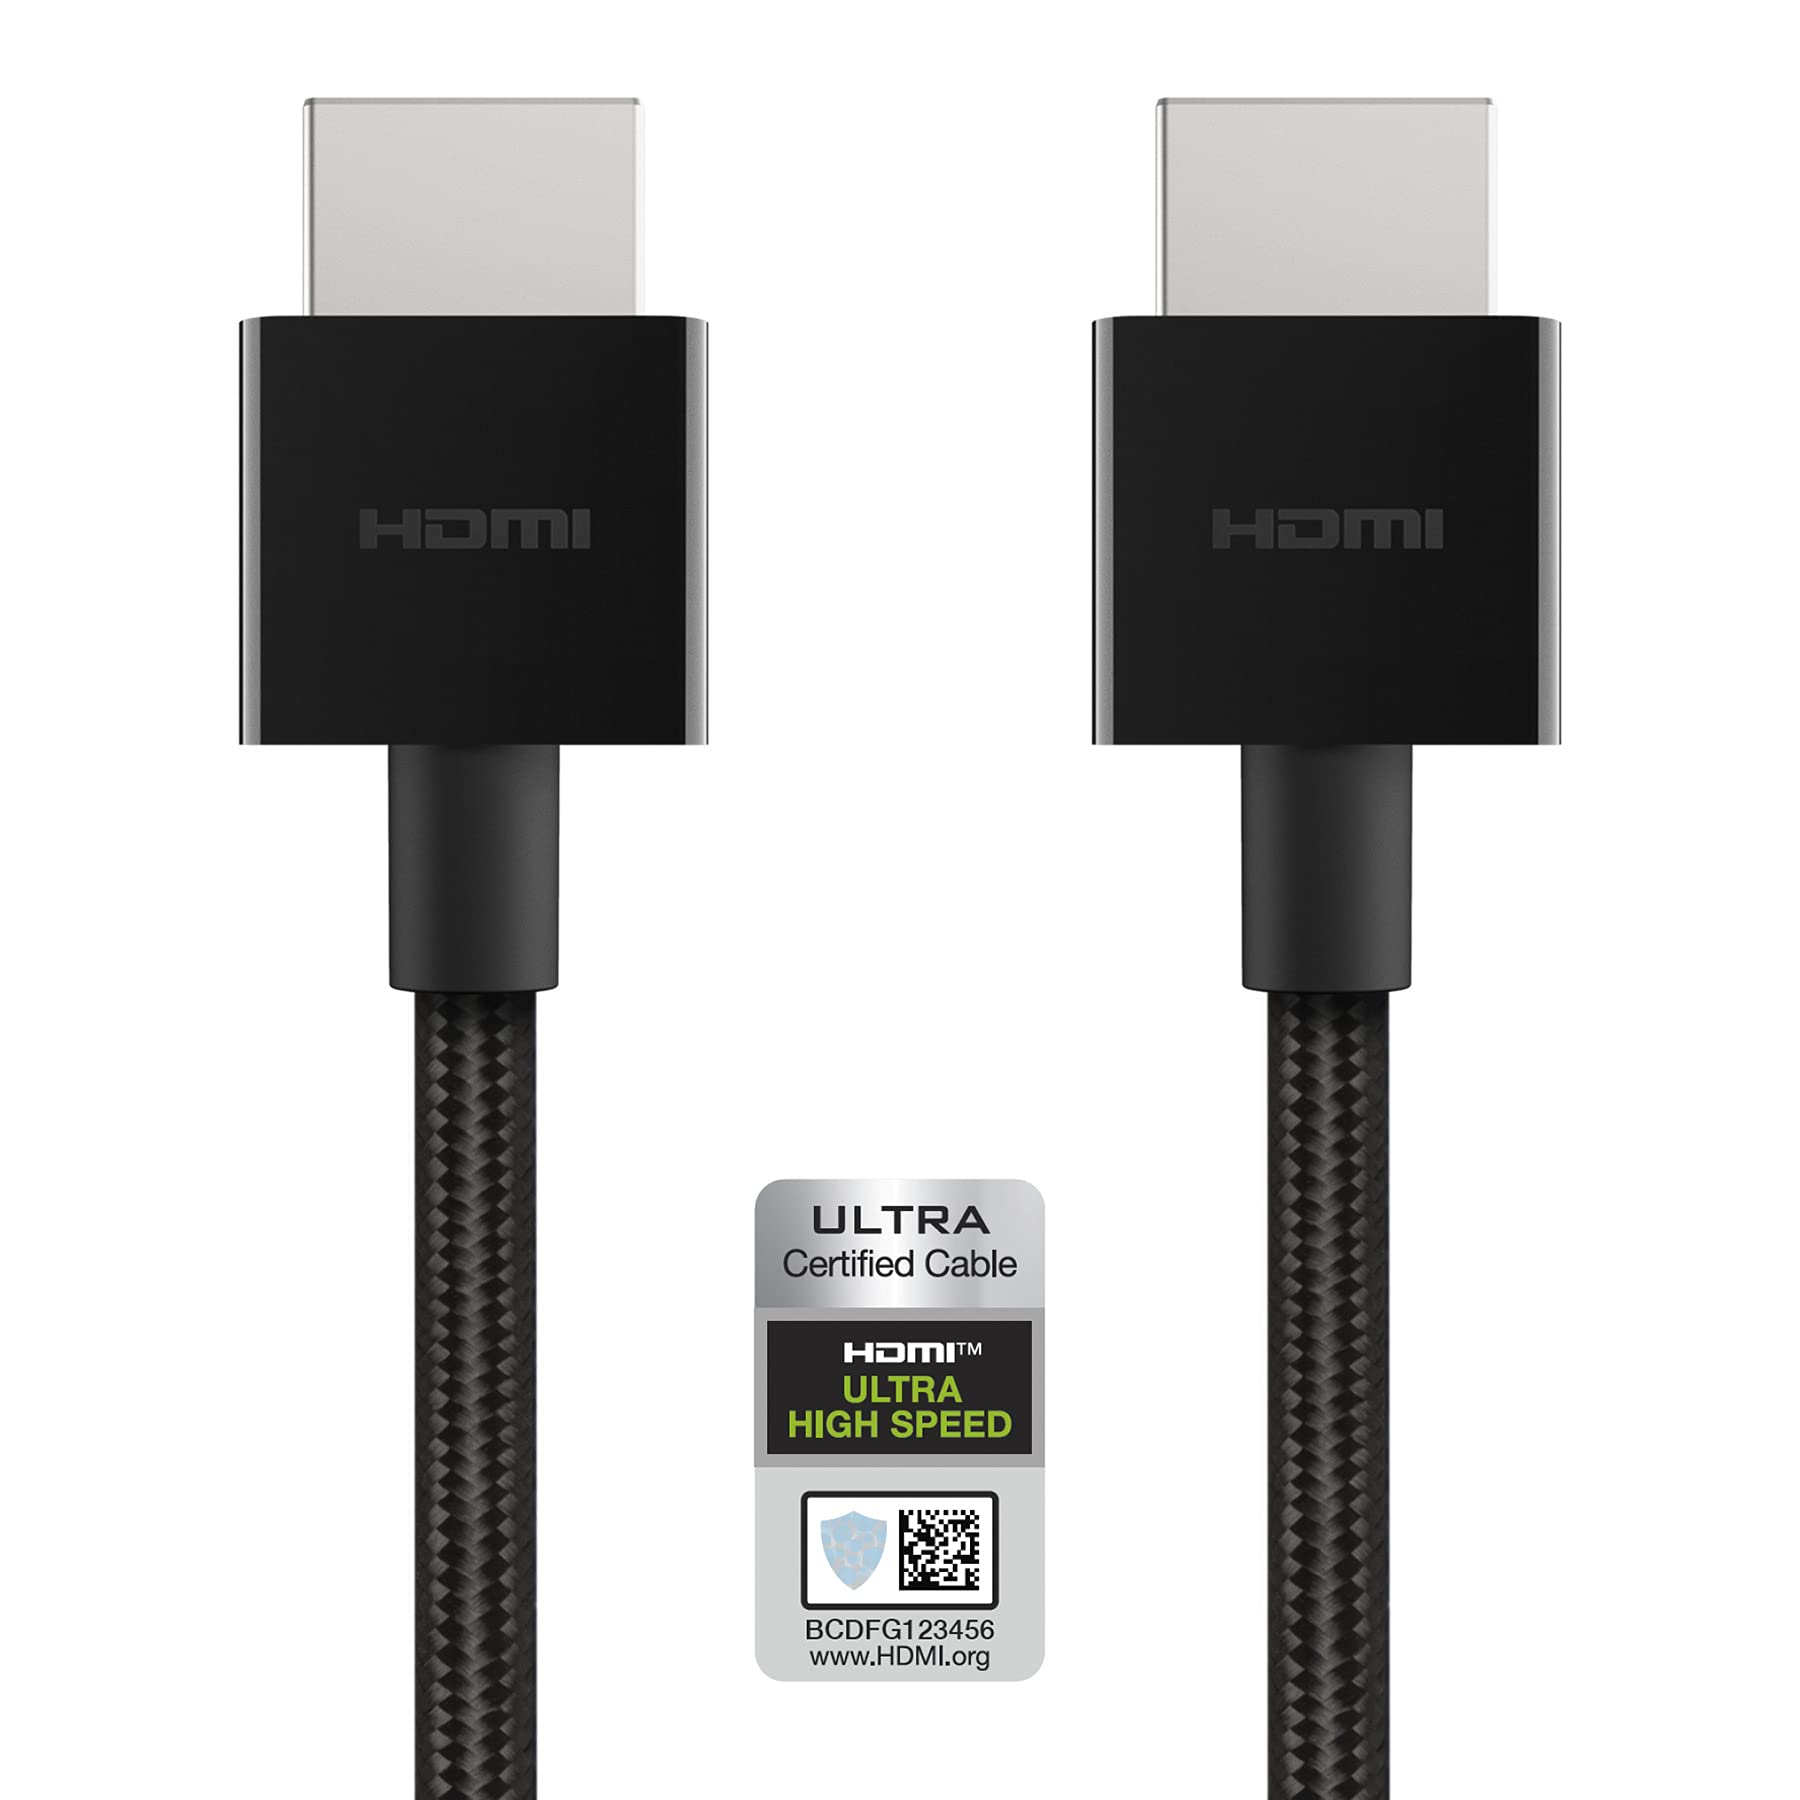 Belkin Ultra HD HDMI 2.1 Cable 6.6FT/2M, 4K Ultra High Speed HDMI Cable, 48Gbps HDMI 2.1 Braided Cord, Dolby Vision HDR & 8K@60Hz Capable, Compatible w/ Playstation, PS4, PS5, Xbox Series X & More